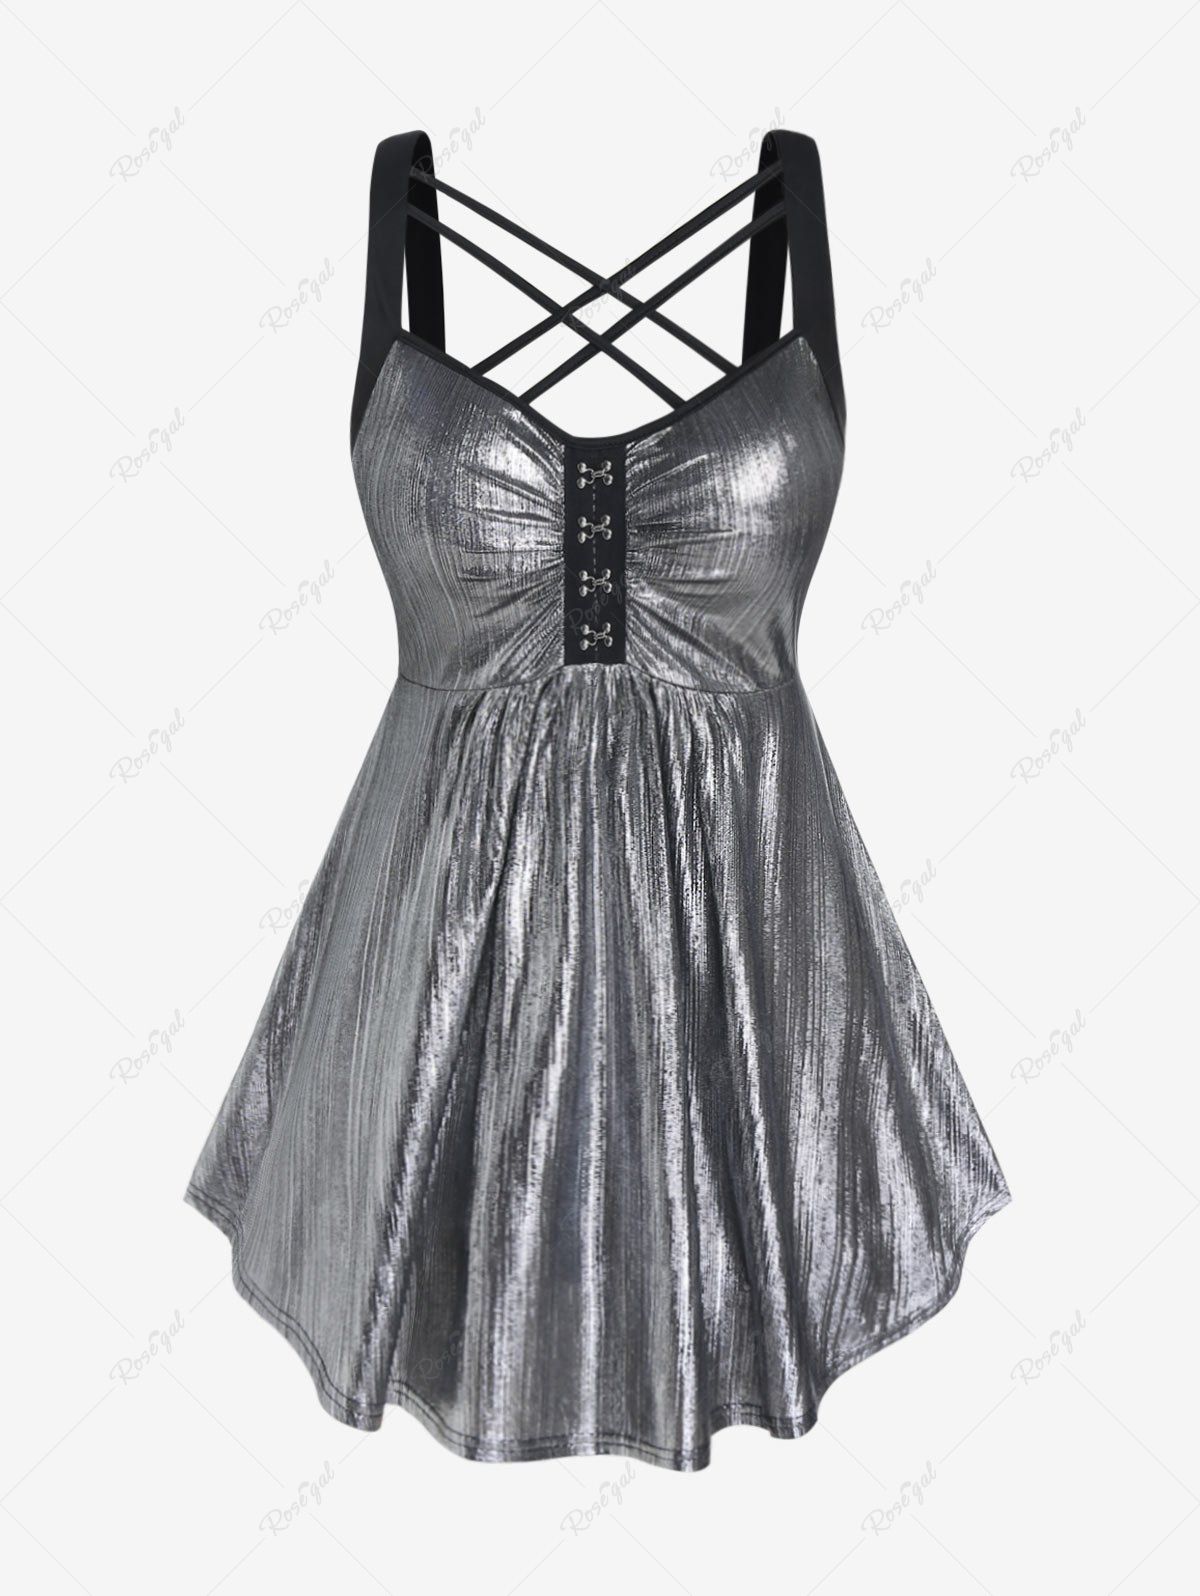 Affordable Plus Size Crisscross Strappy Backless Metal Tunic Top  